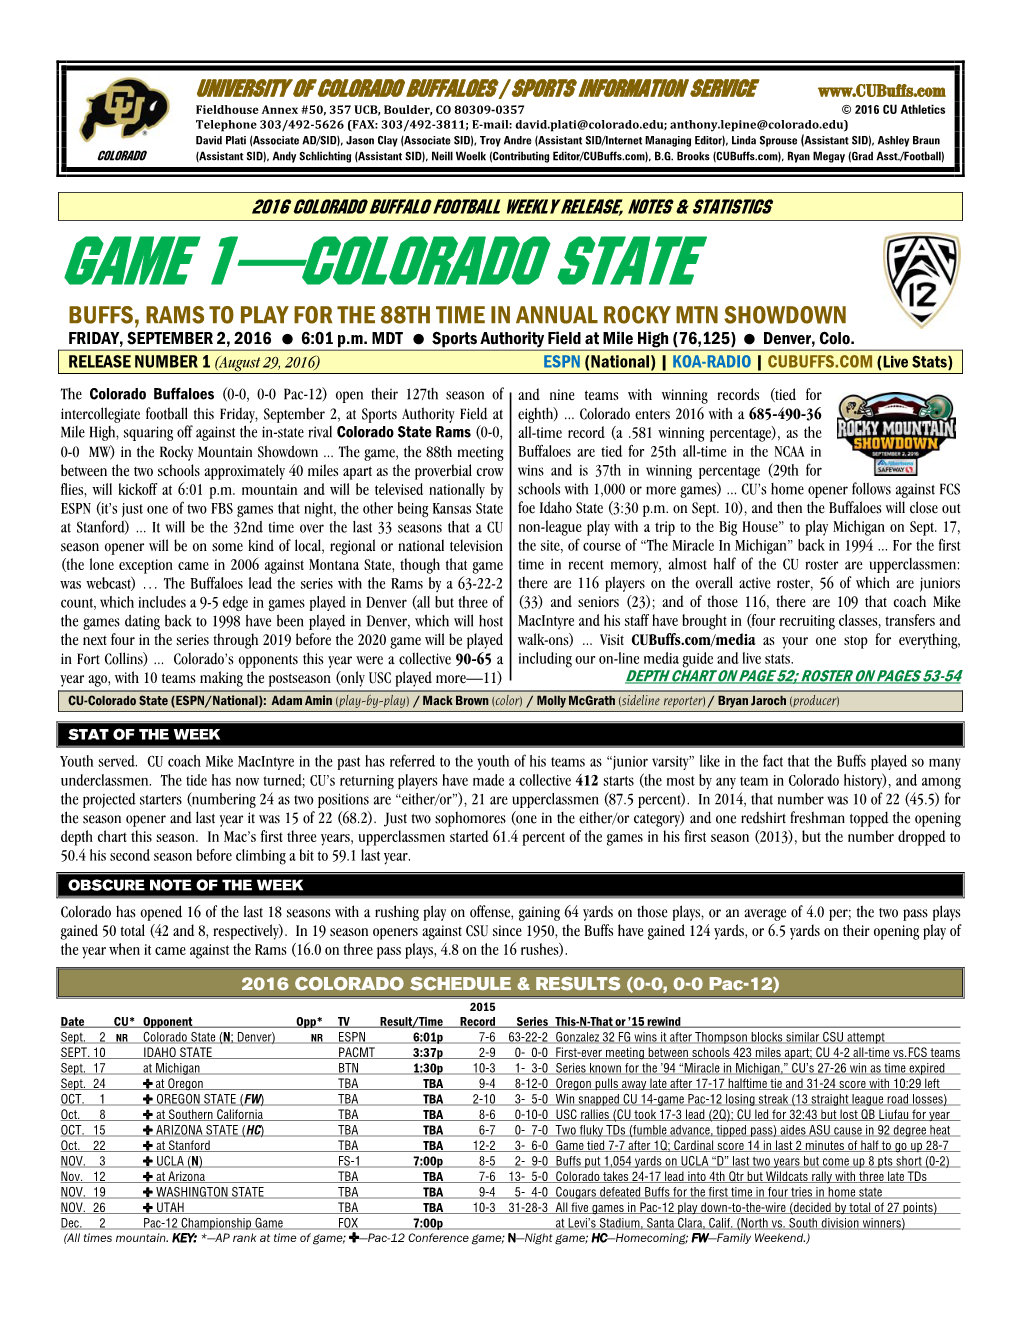 GAME 1—COLORADO STATE BUFFS, RAMS to PLAY for the 88TH TIME in ANNUAL ROCKY MTN SHOWDOWN FRIDAY, SEPTEMBER 2, 2016 6:01 P.M